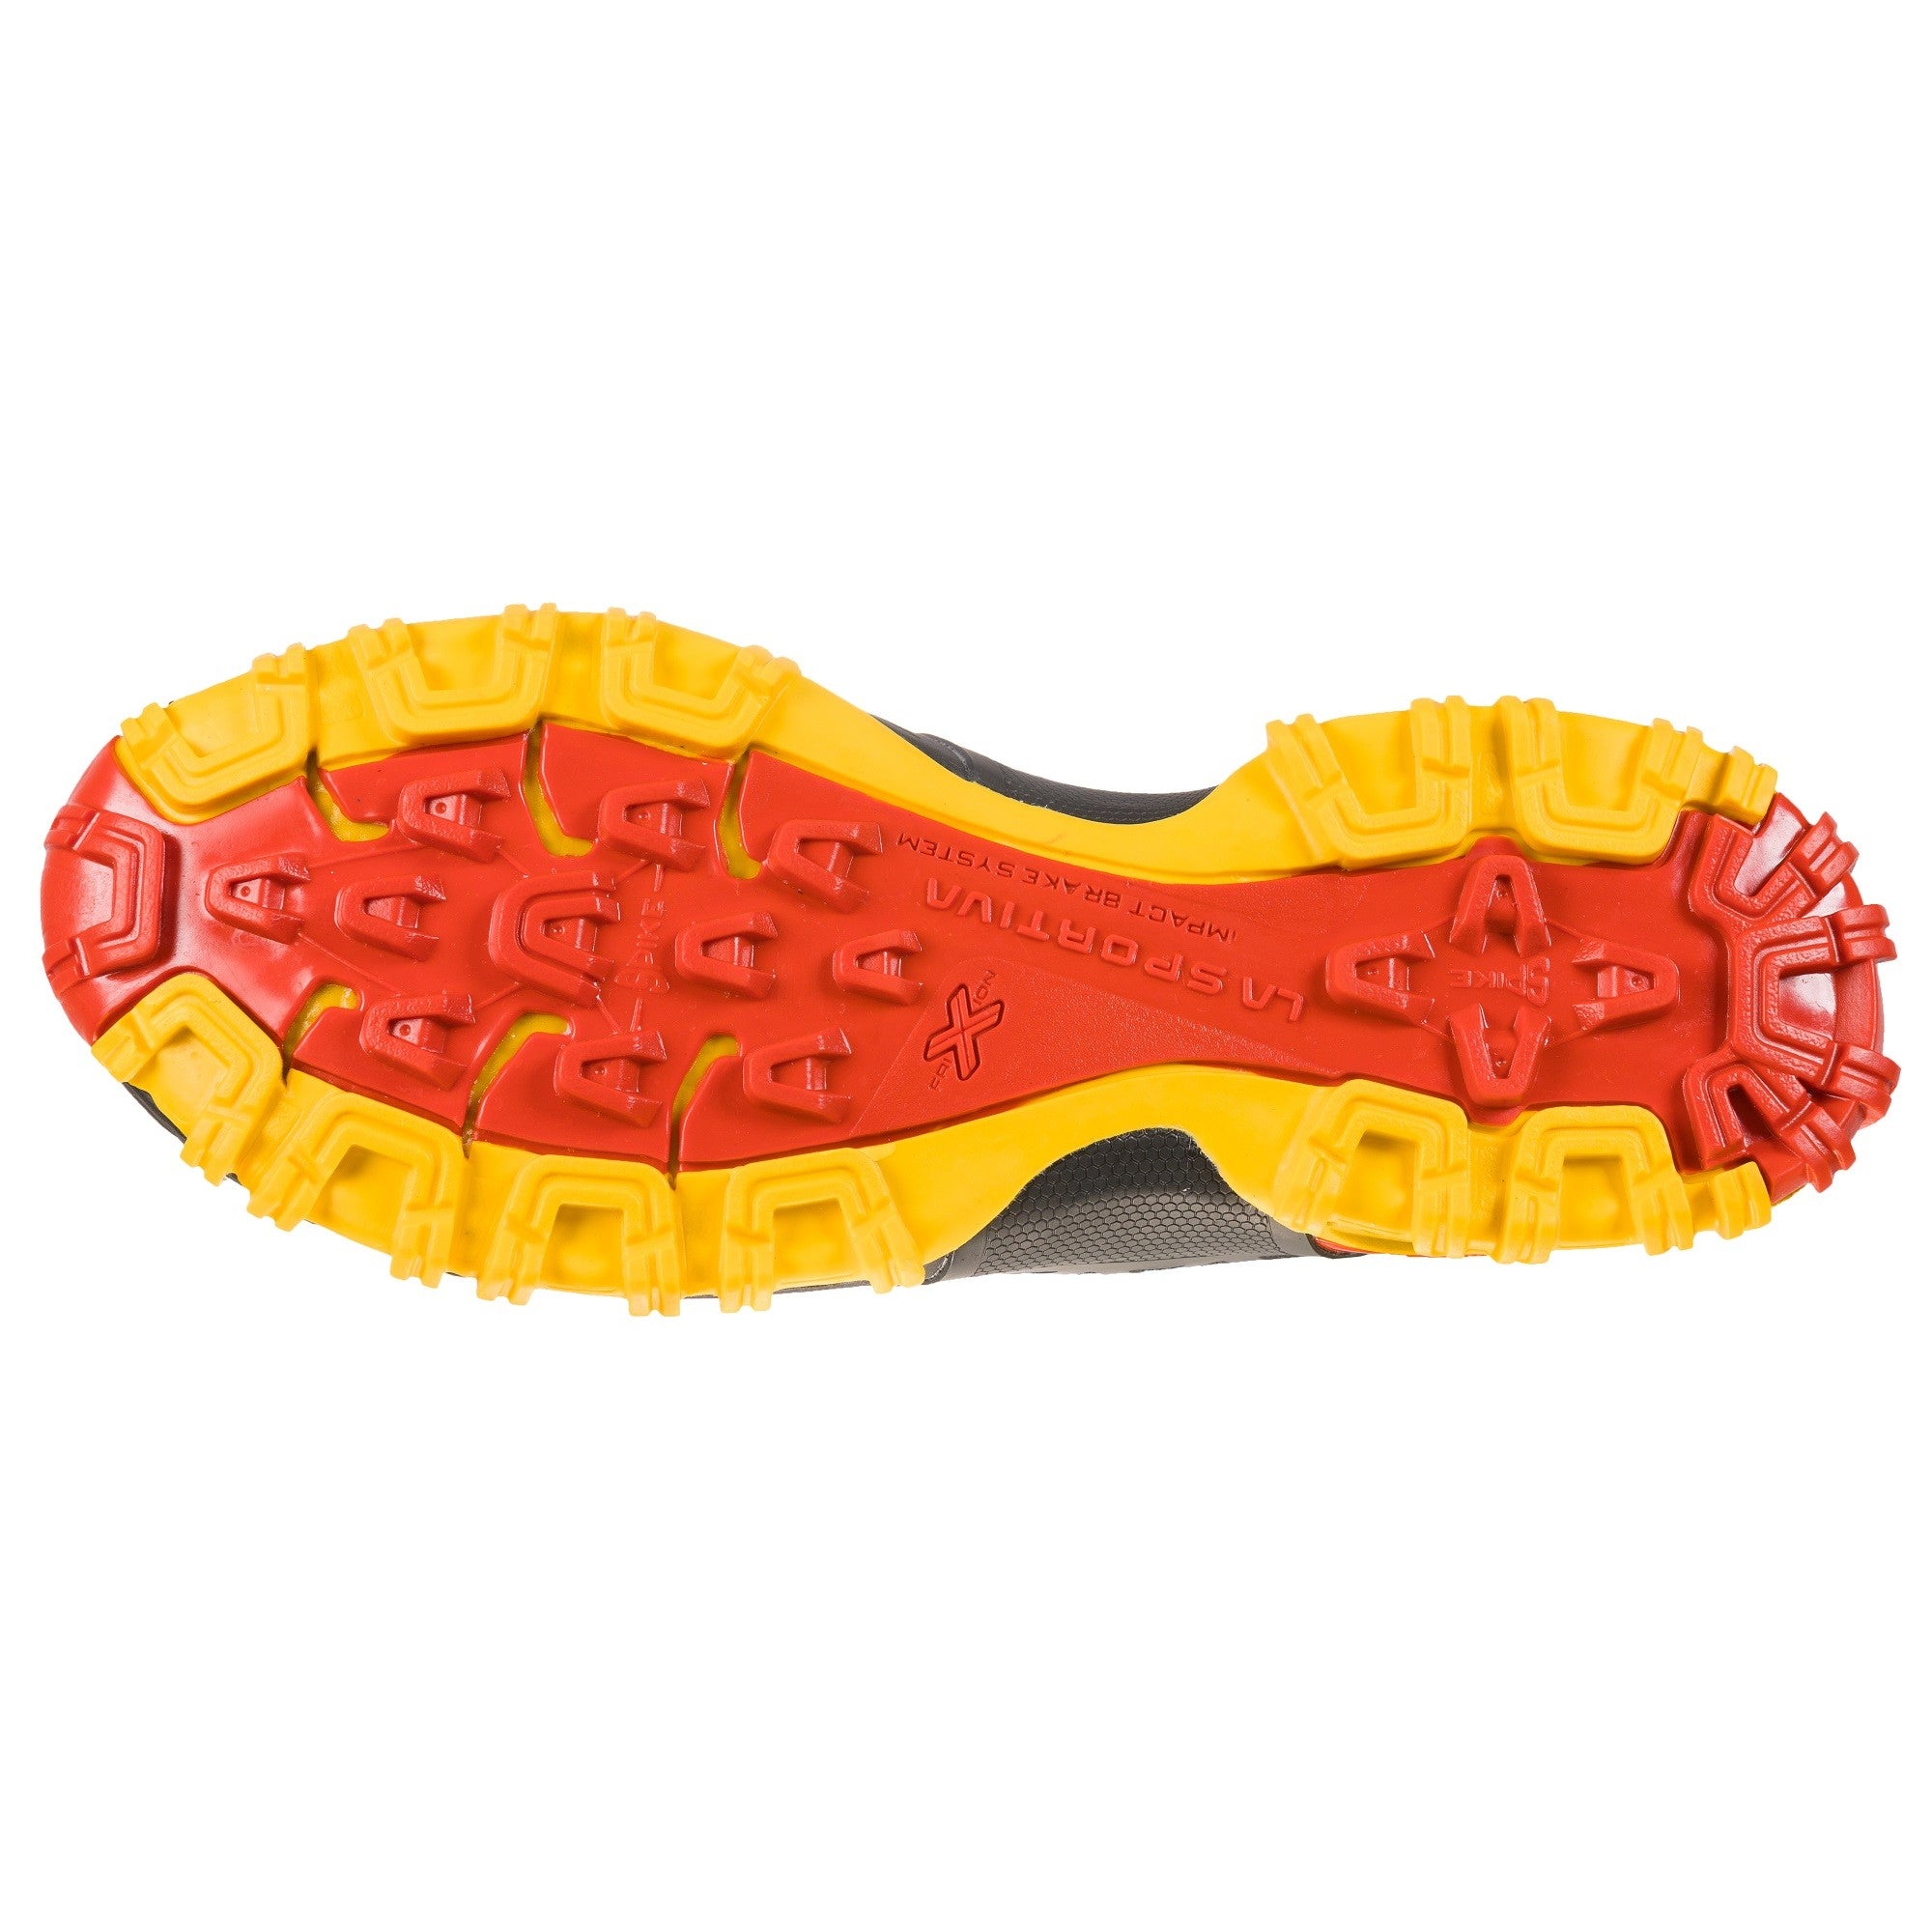 La Sportiva Bushido II trail running shoe, outer side view in Black/Yellow/red colours